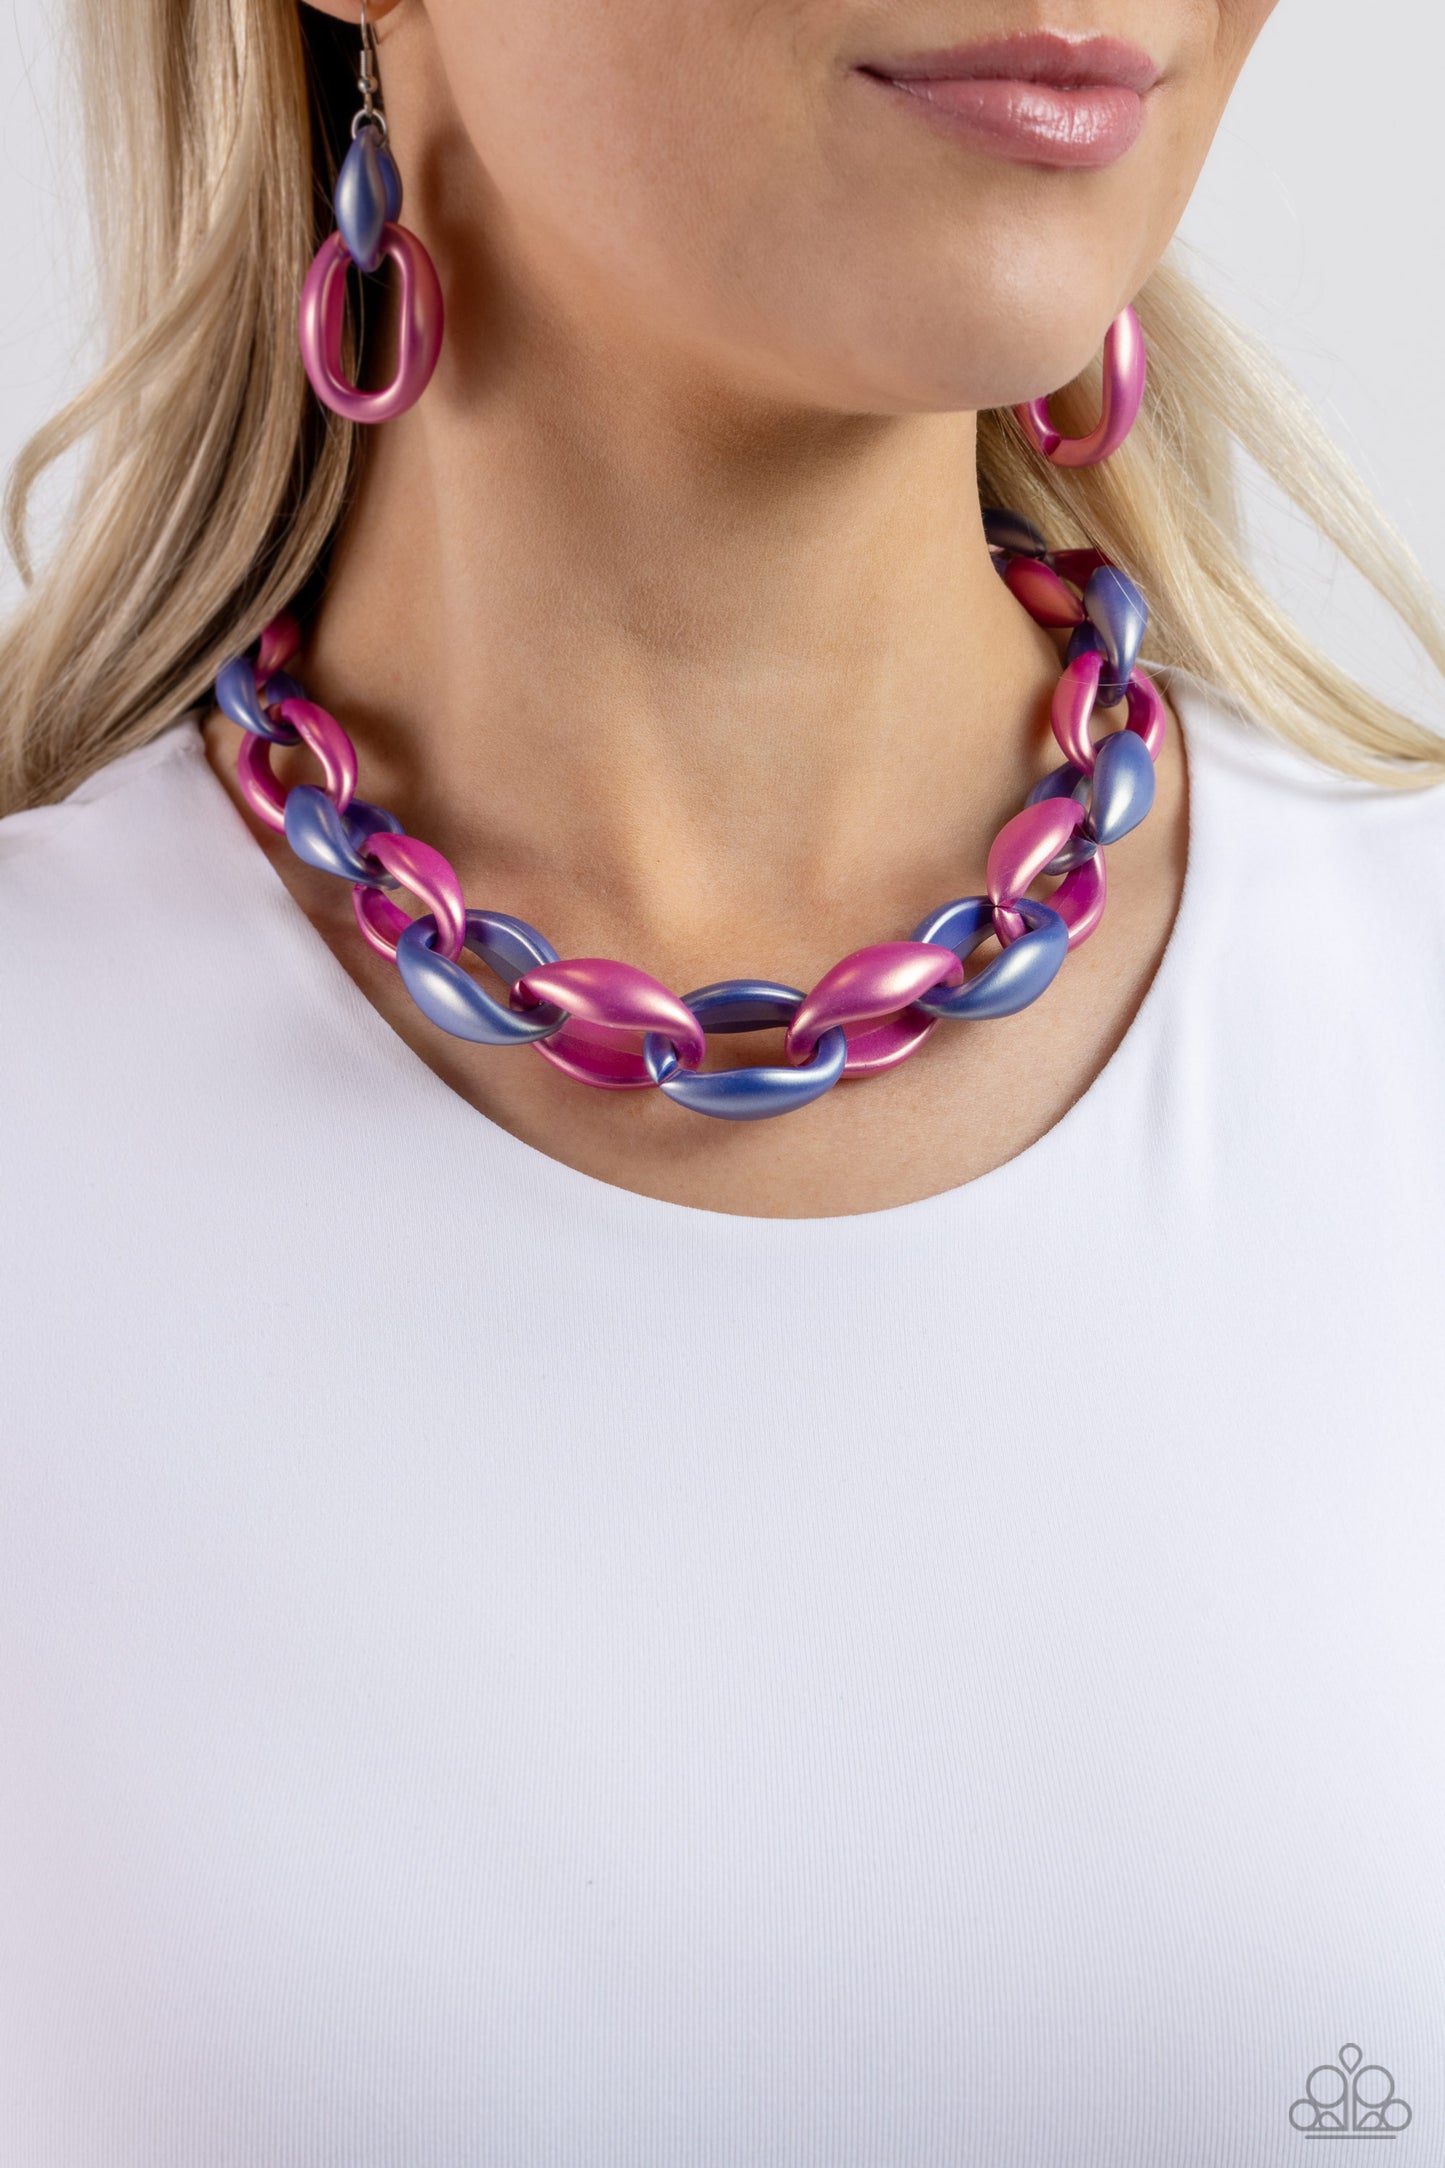 Paparazzi Accessories - Statement Season - Multi Necklace Persian Jewel and Rose Violet concaved hoops gradually increase in size as they elongate towards the middle of the neckline for a colorful combination. Features an adjustable clasp closure.  Sold as one individual necklace. Includes one pair of matching earrings.